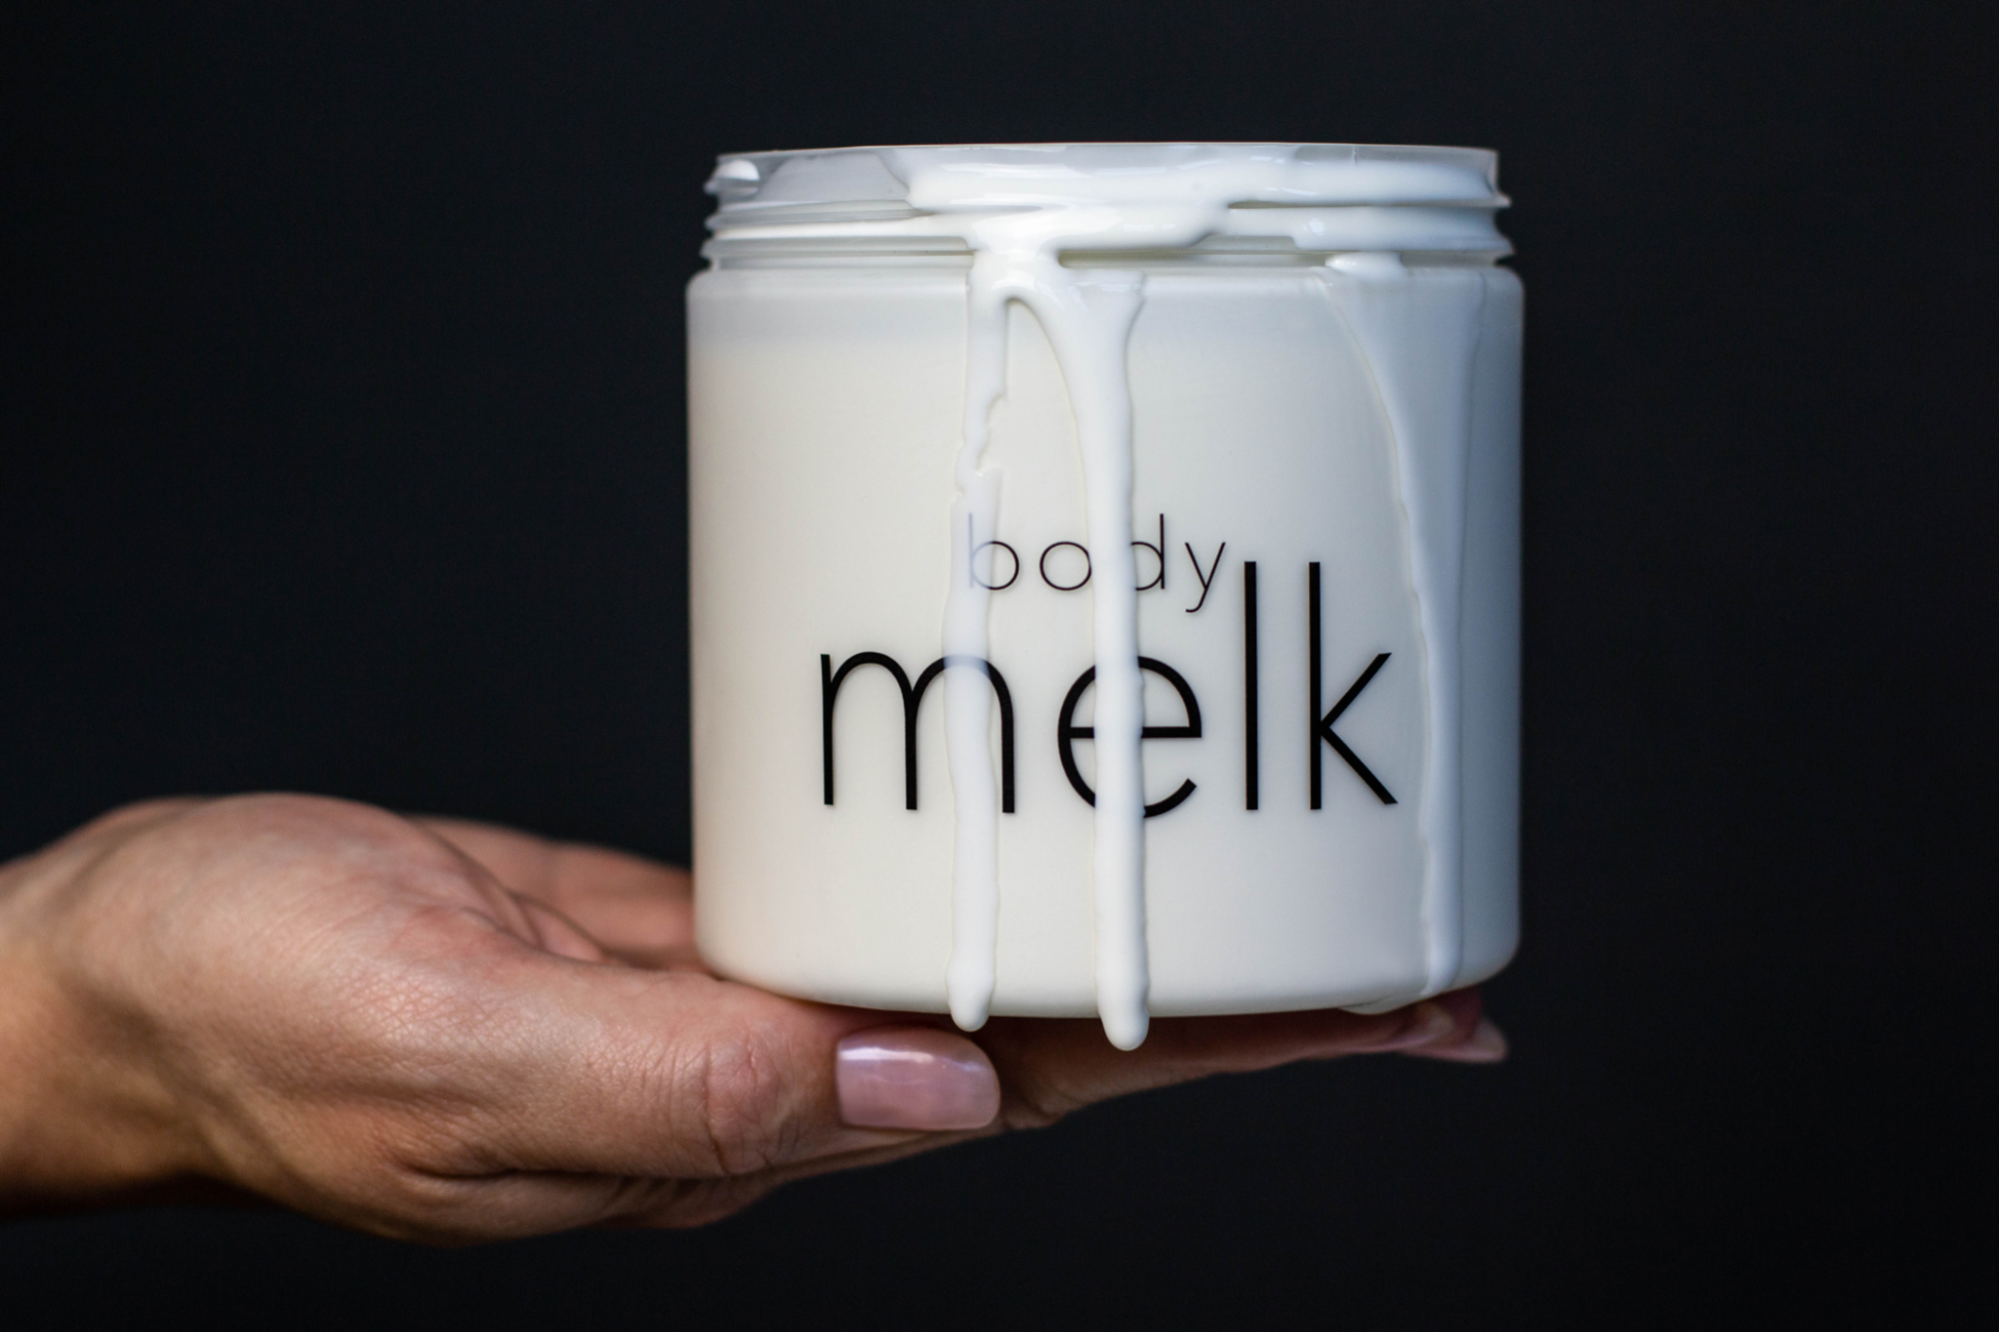 Embrace Natural Beauty with Melkit: A One-Step Face and Body Cream
That’s Free of Harmful Chemicals